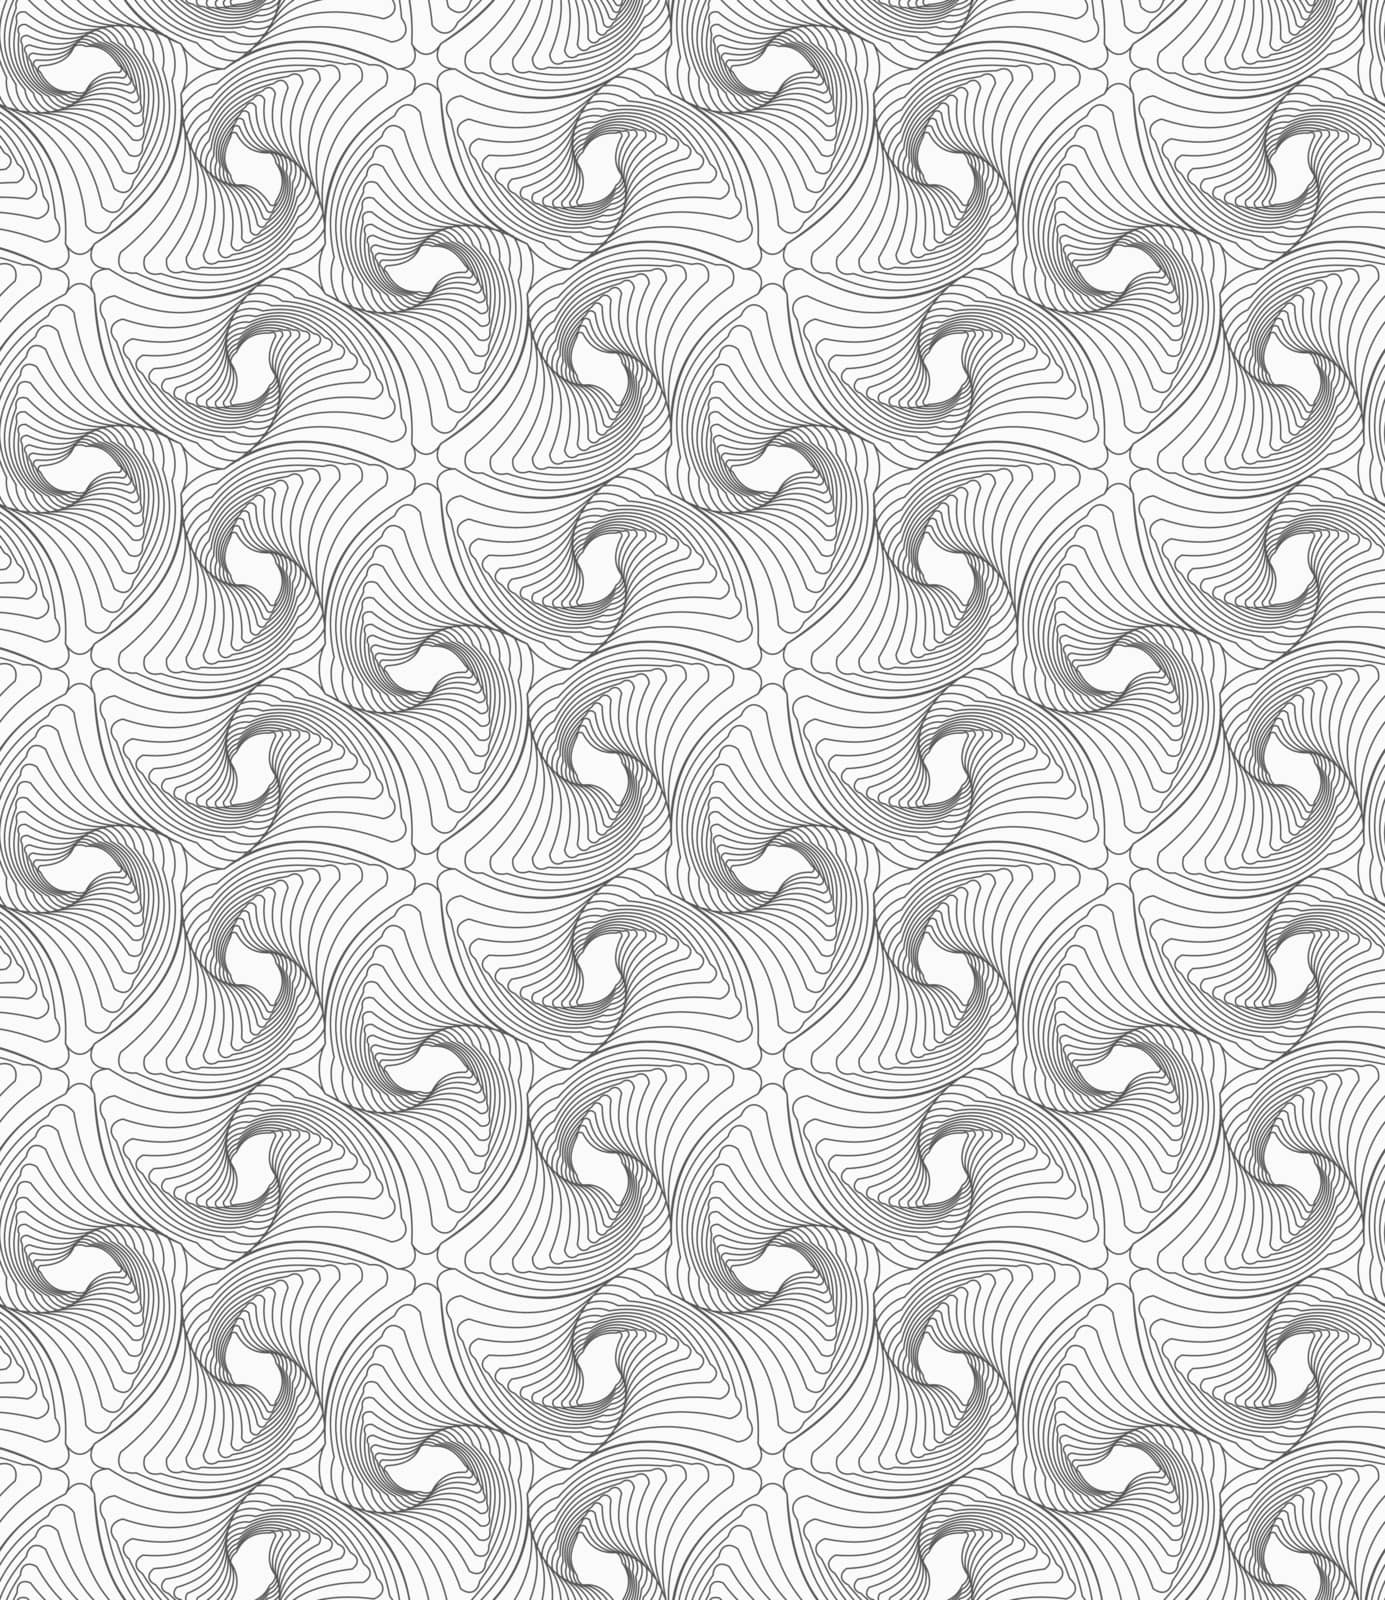 Monochrome abstract geometrical pattern. Modern gray seamless background. Flat simple design.Gray wavy twisted rounded sea stars.